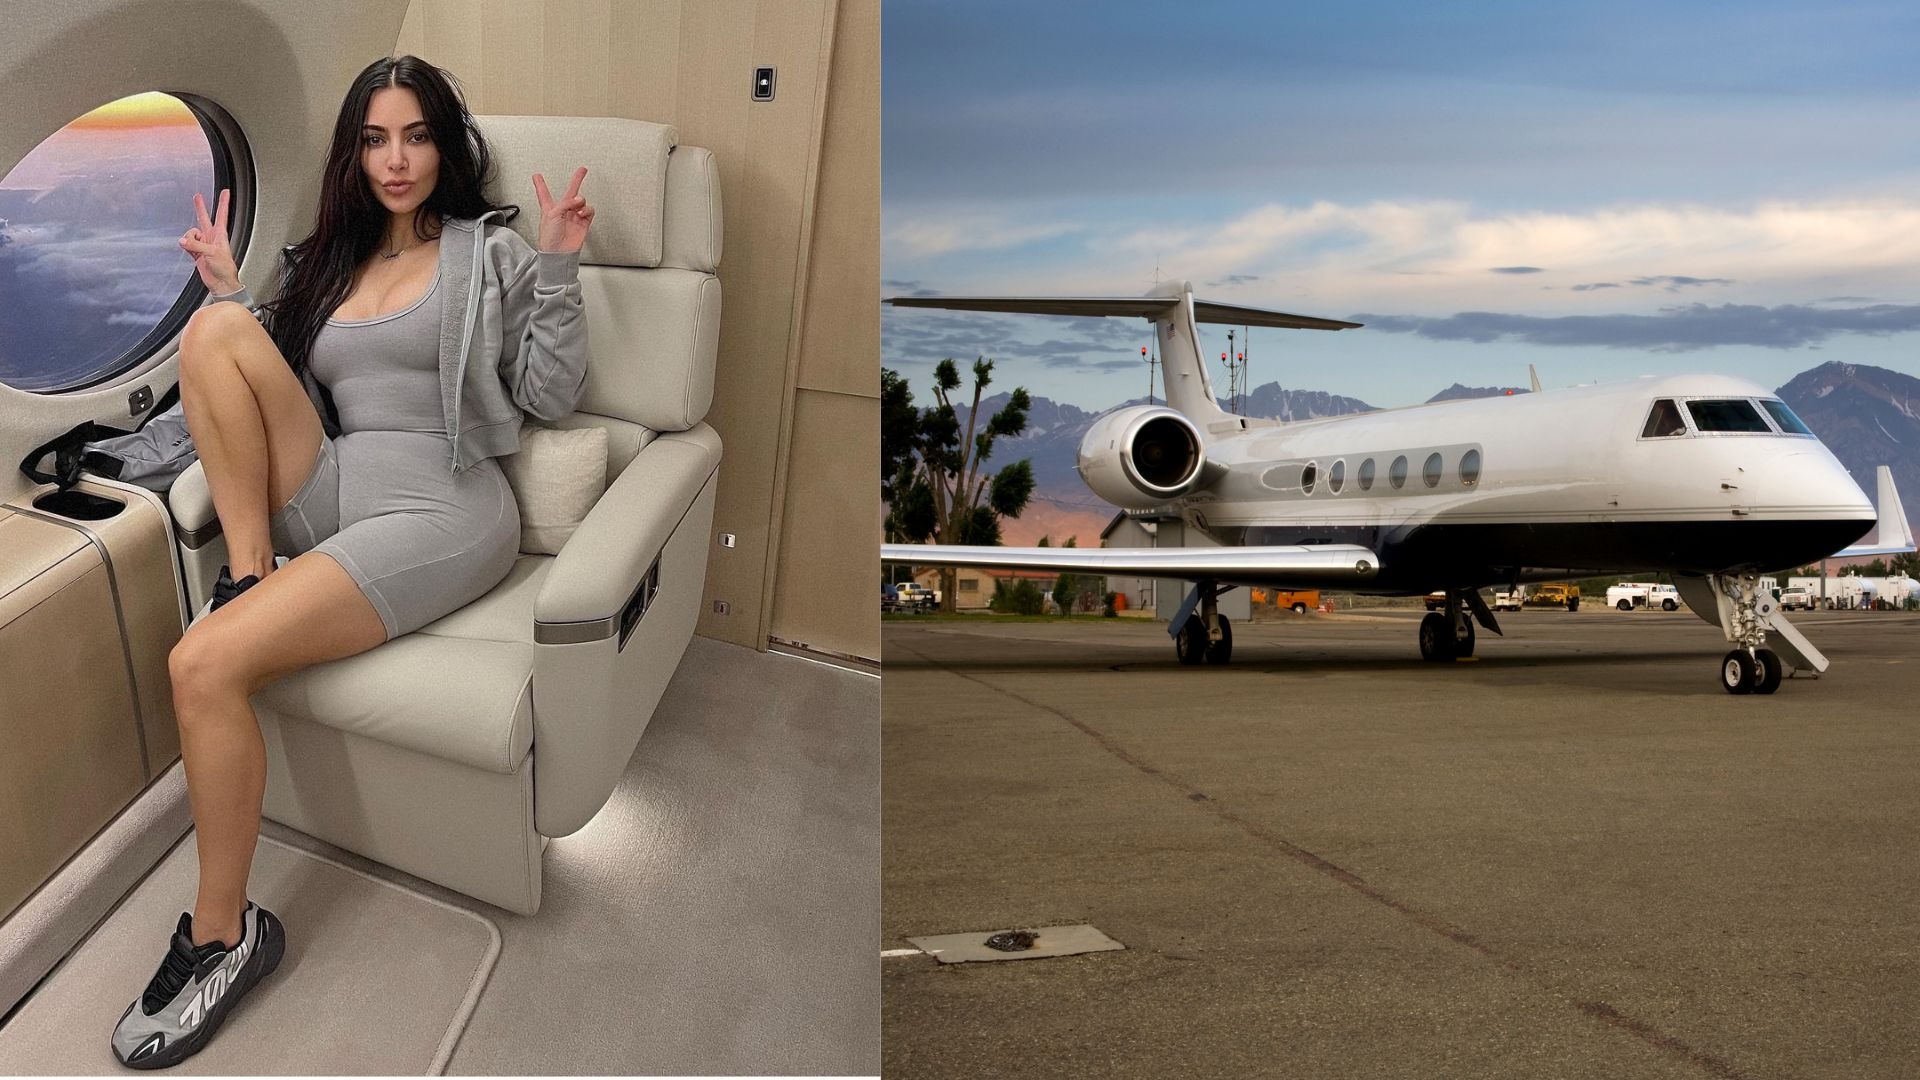 Kim Kardashian's Private Jet The Life of the Rich and Famous